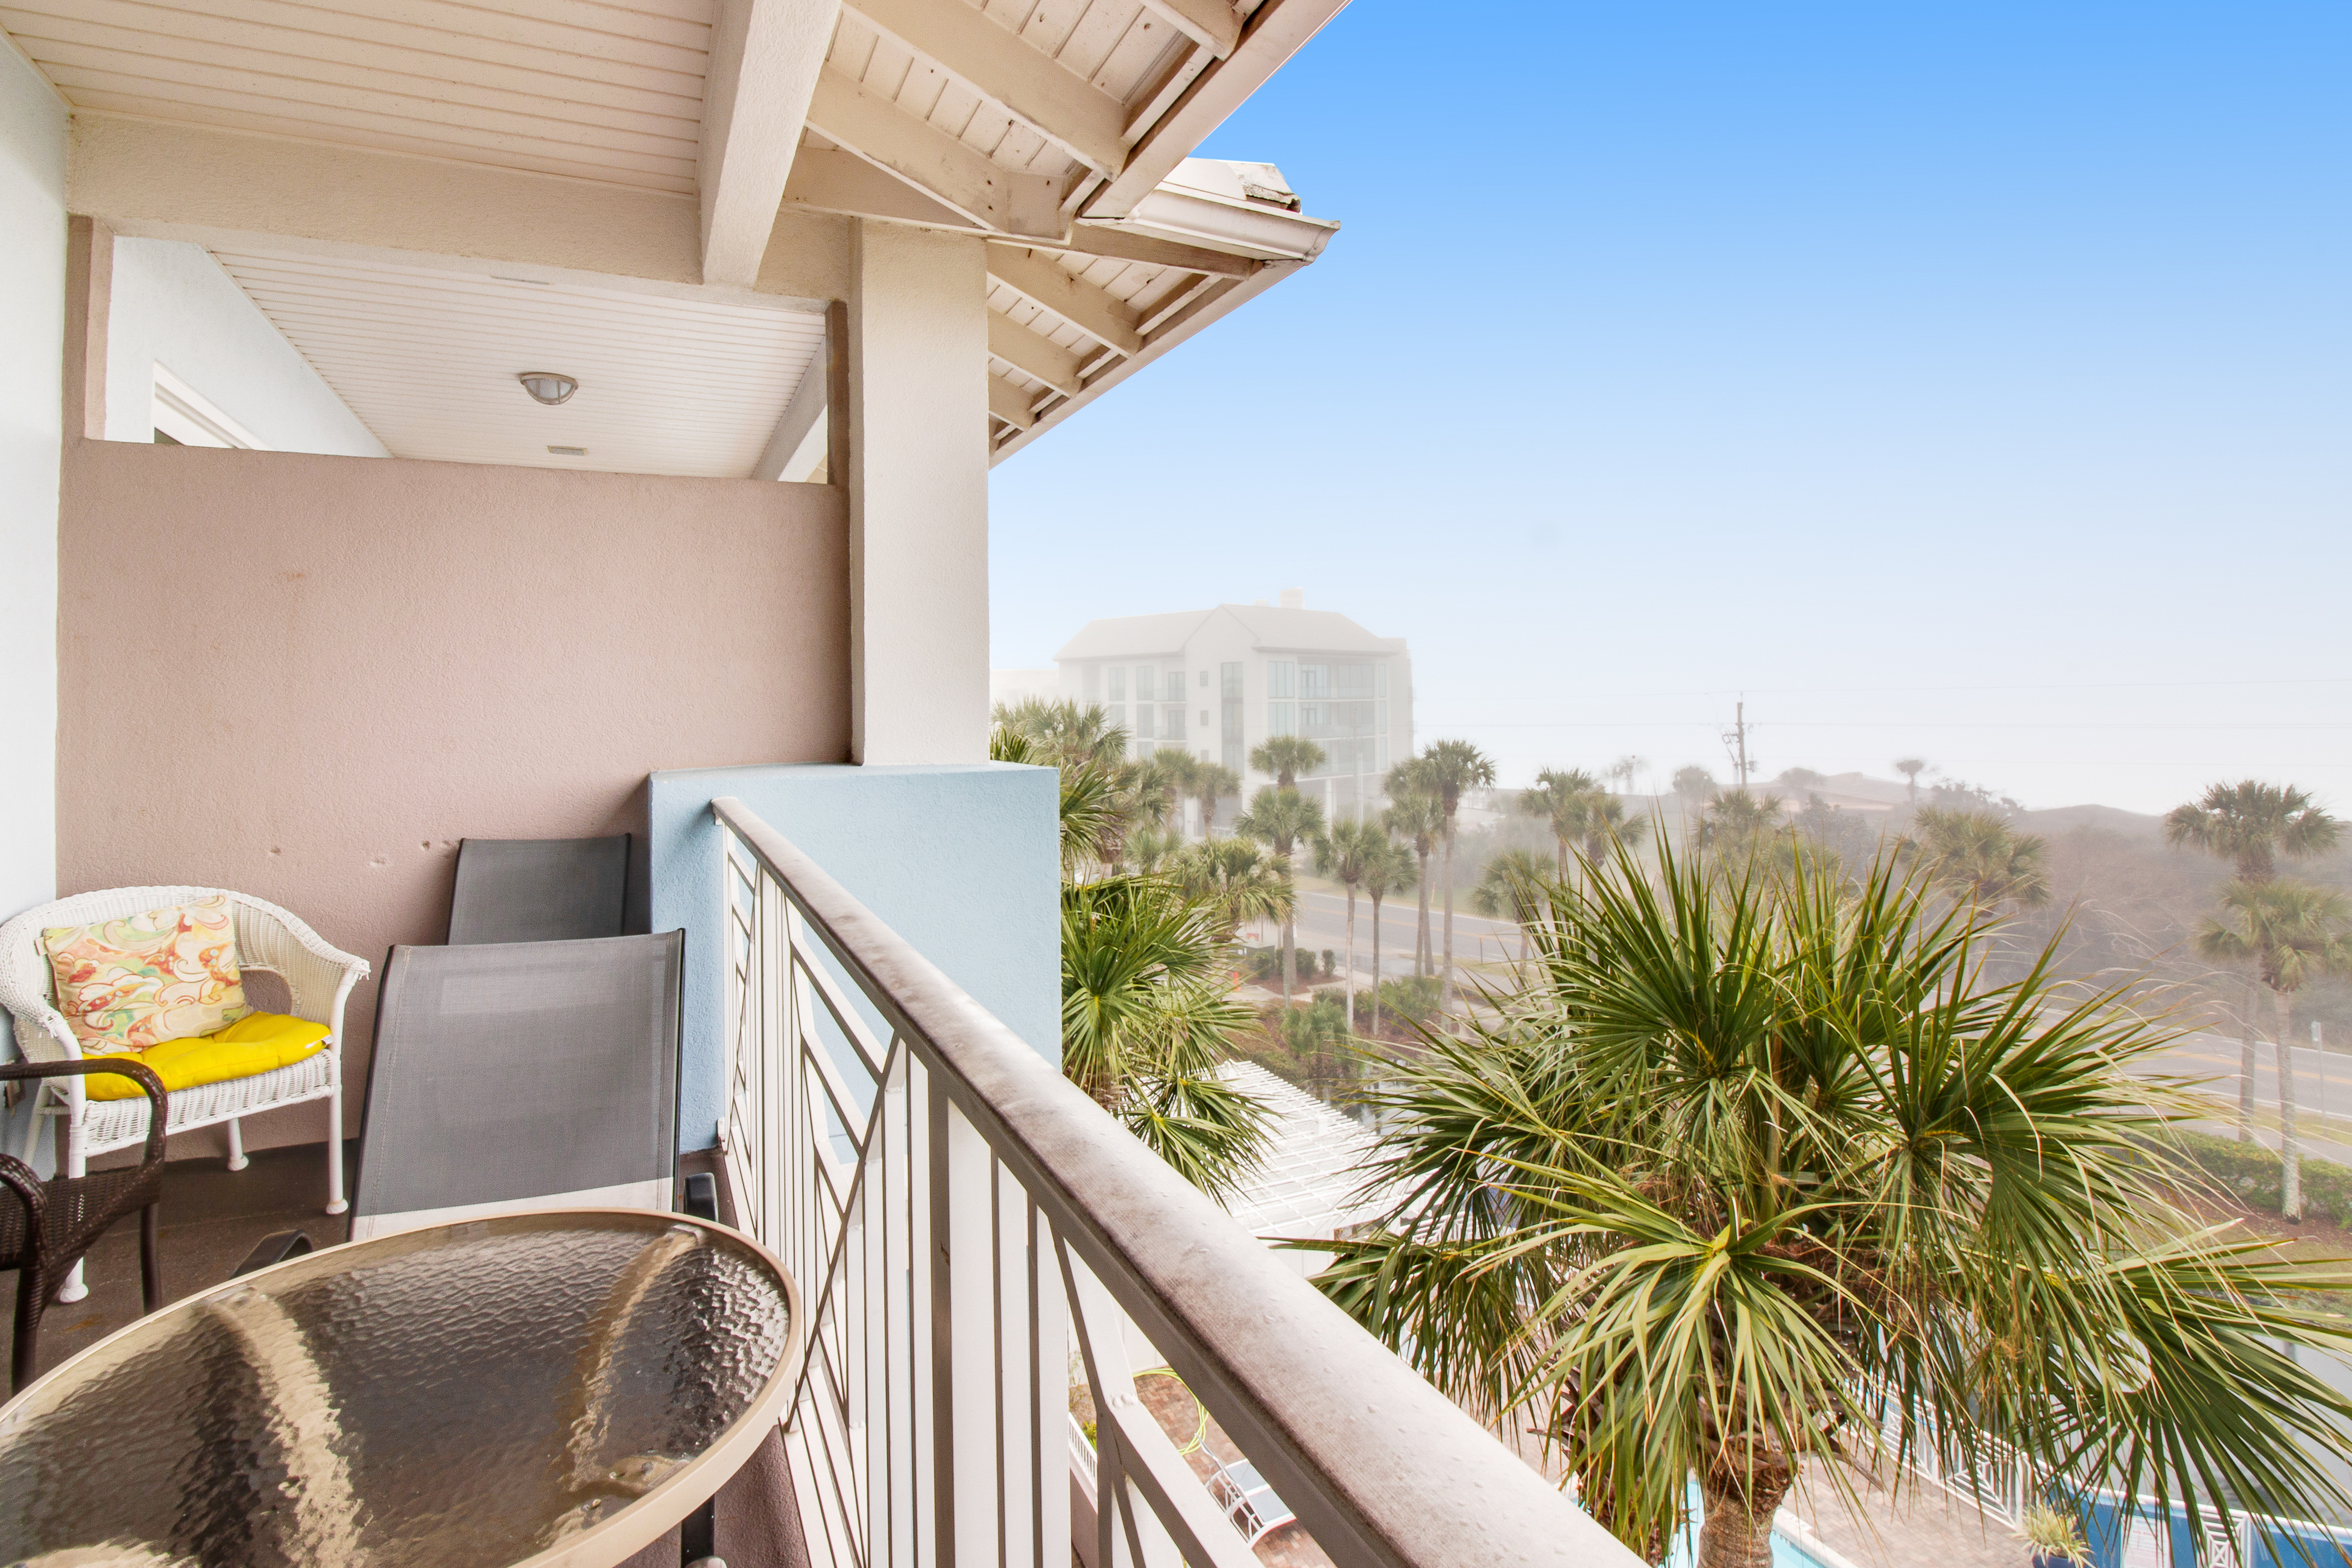 Gulf Place Cabanas 407 Condo rental in Gulf Place Cabanas ~ Santa Rosa Beach Vacation Rentals by BeachGuide 30a in Highway 30-A Florida - #16